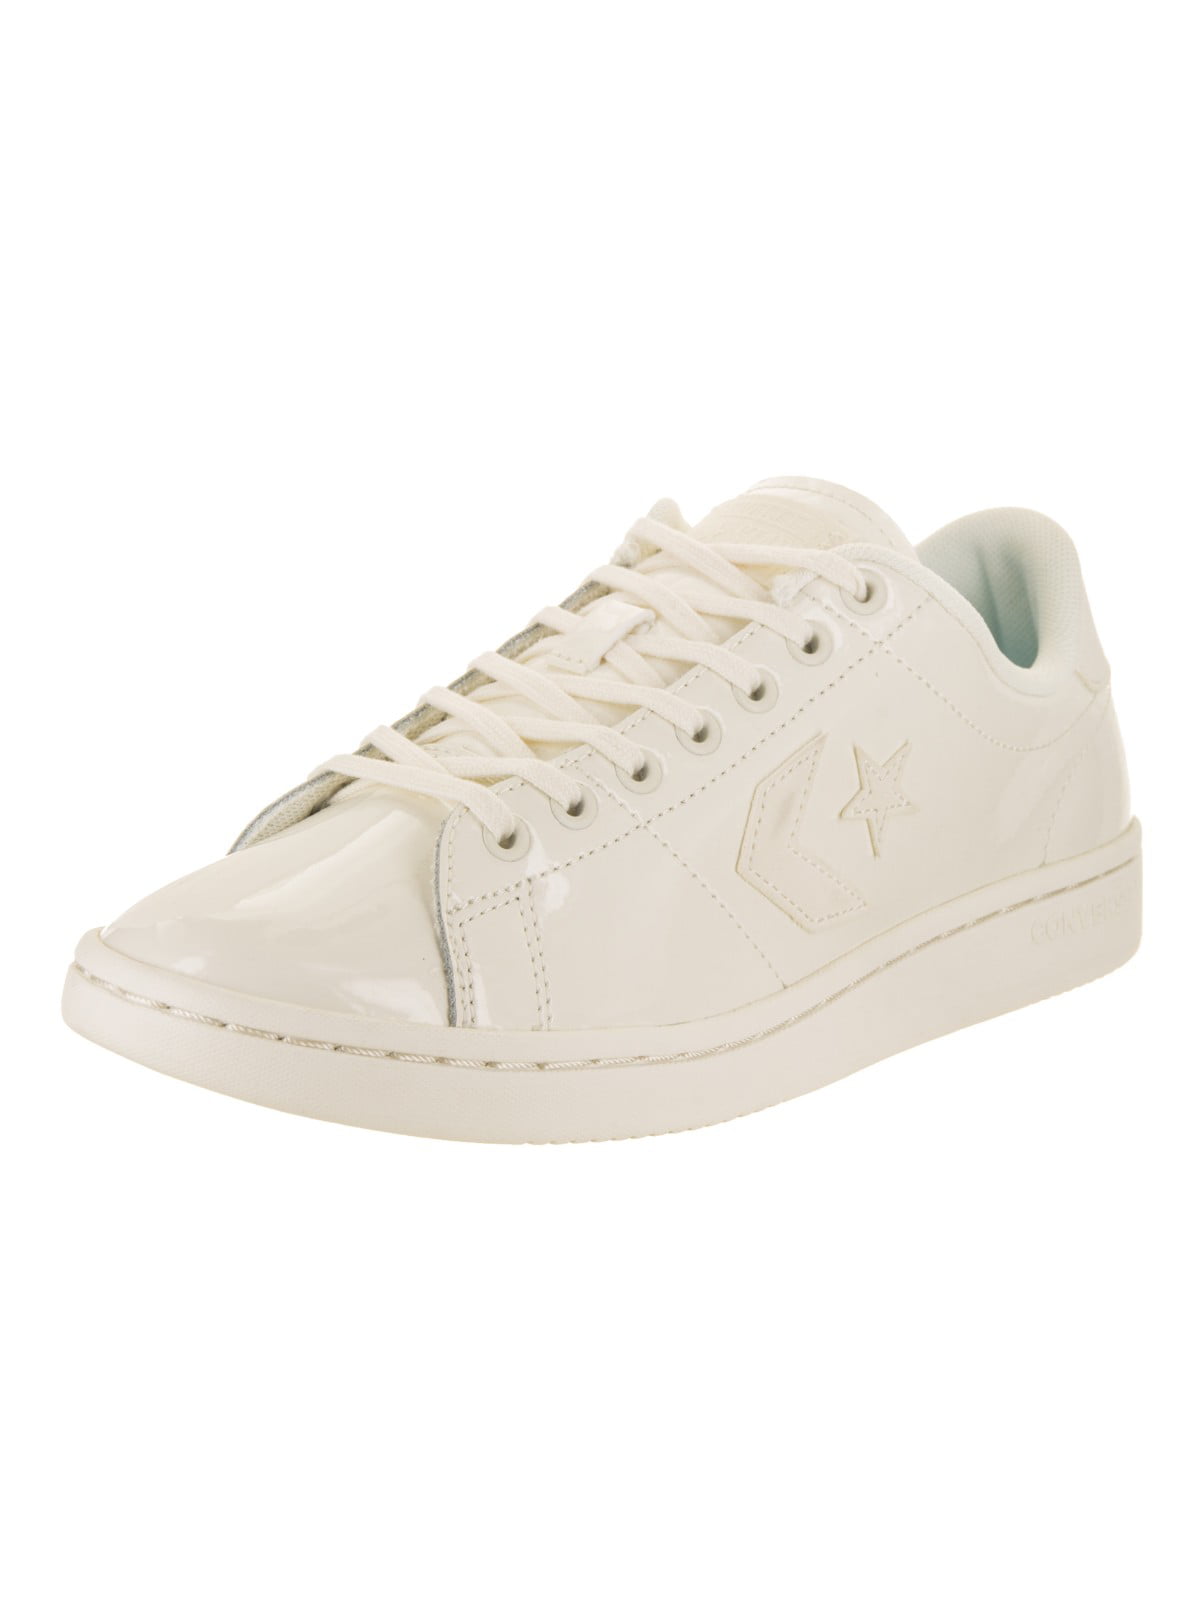 converse all court ox